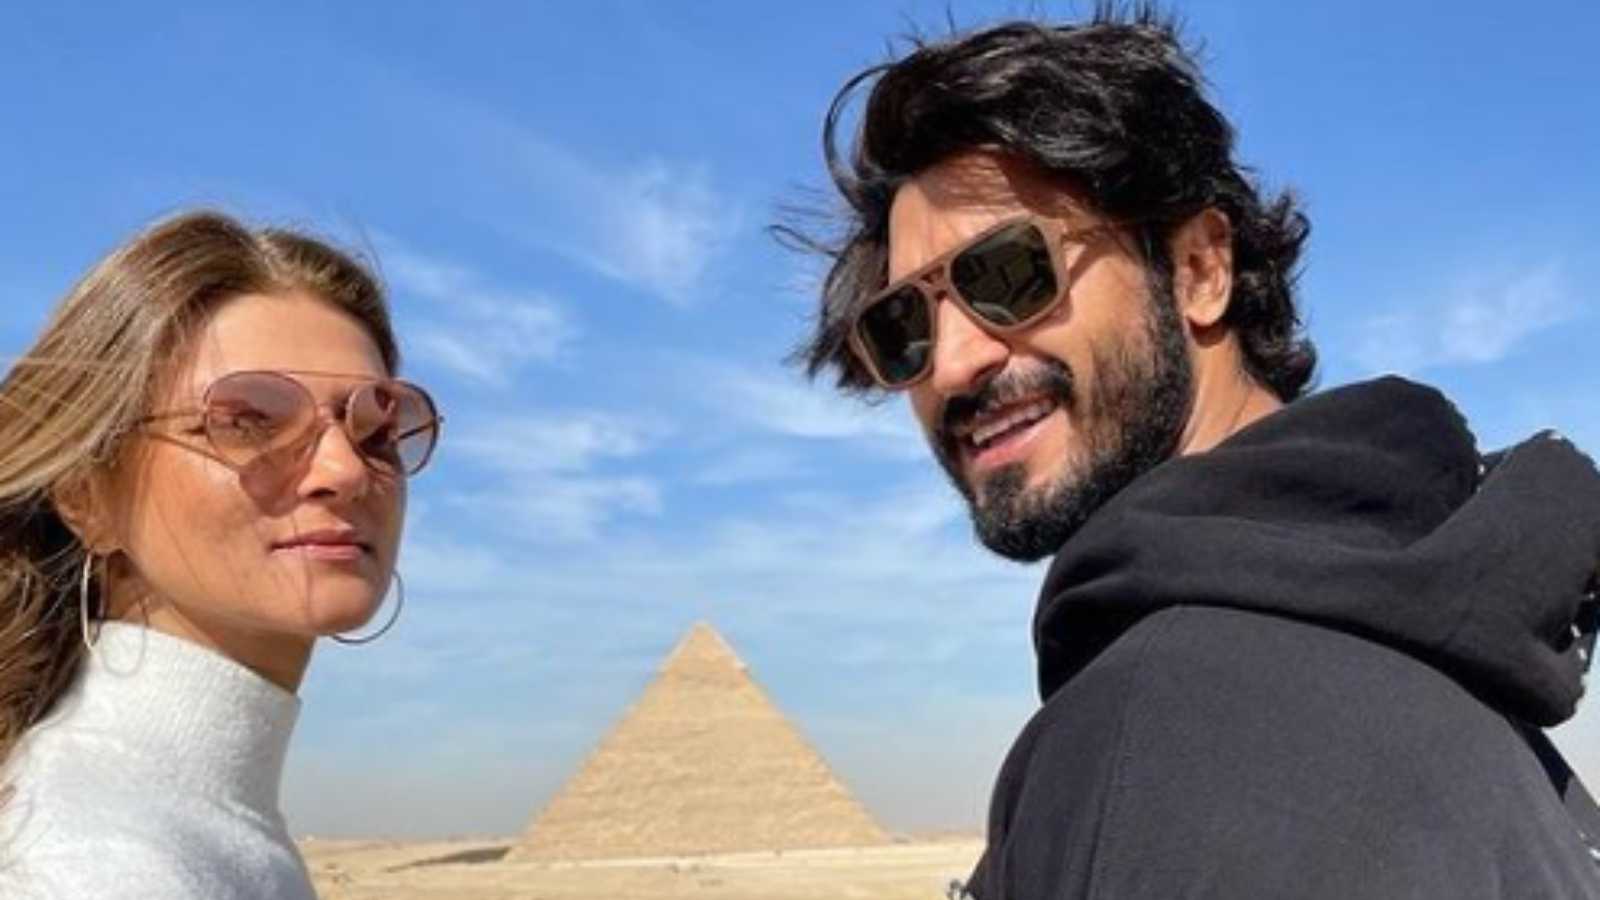 Vidyut Jammwal and fiance Nandita Mahtani to tie the knot in London? soon-to-be groom to head off to the location